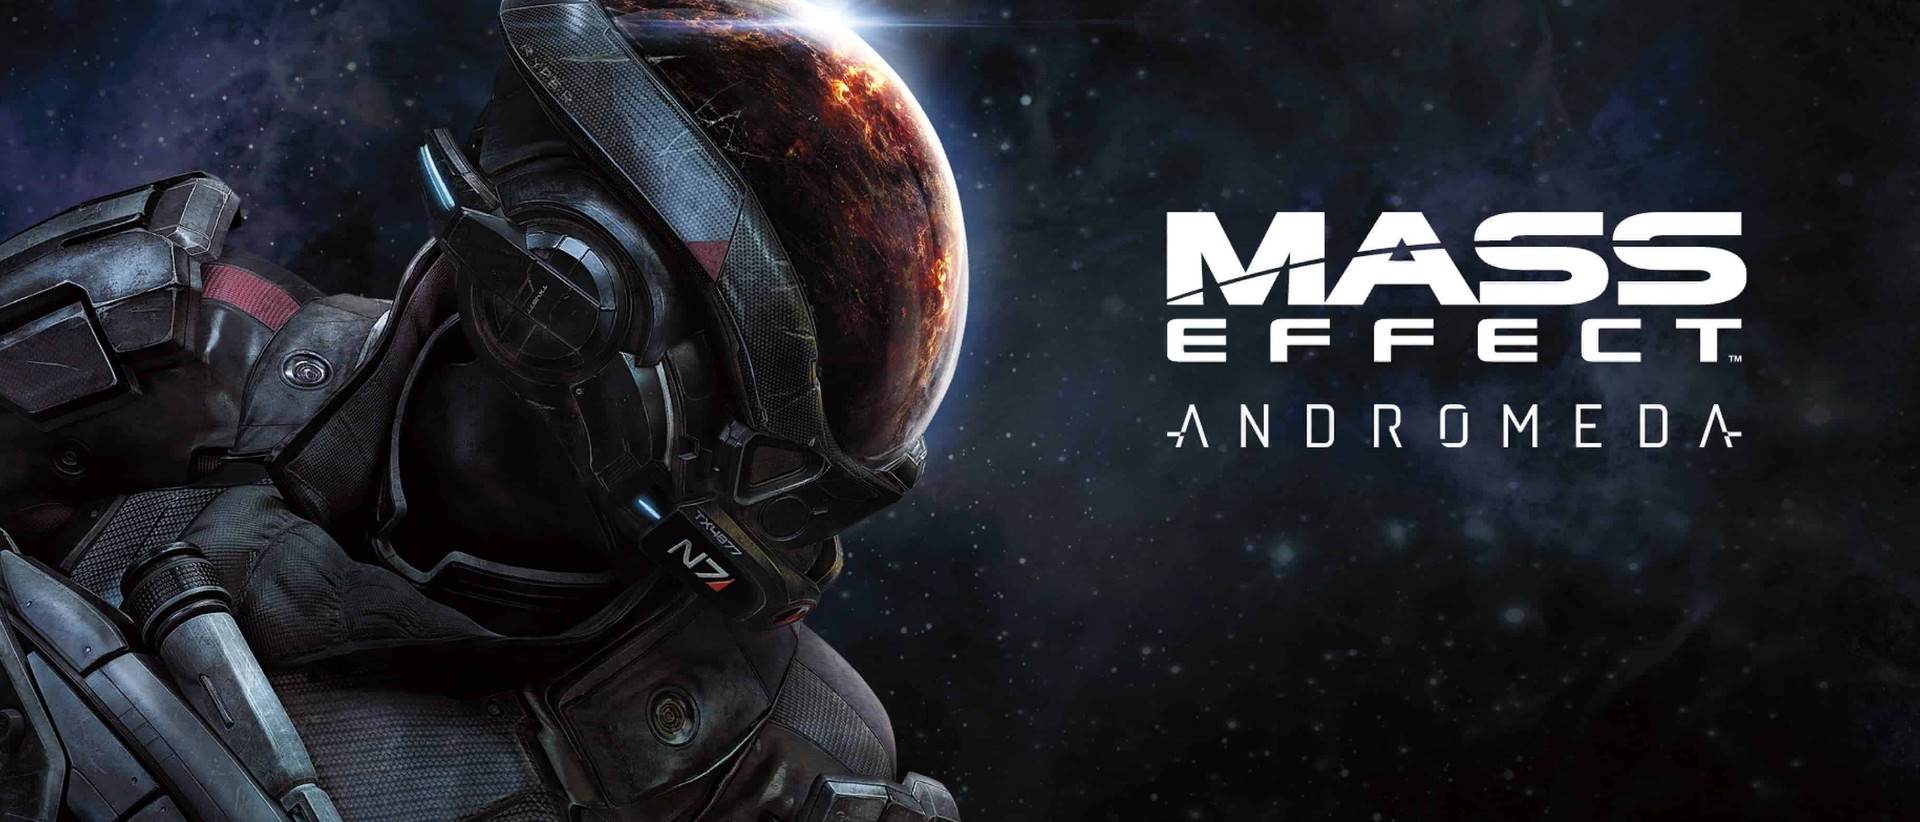 mass effect andromeda pc specs